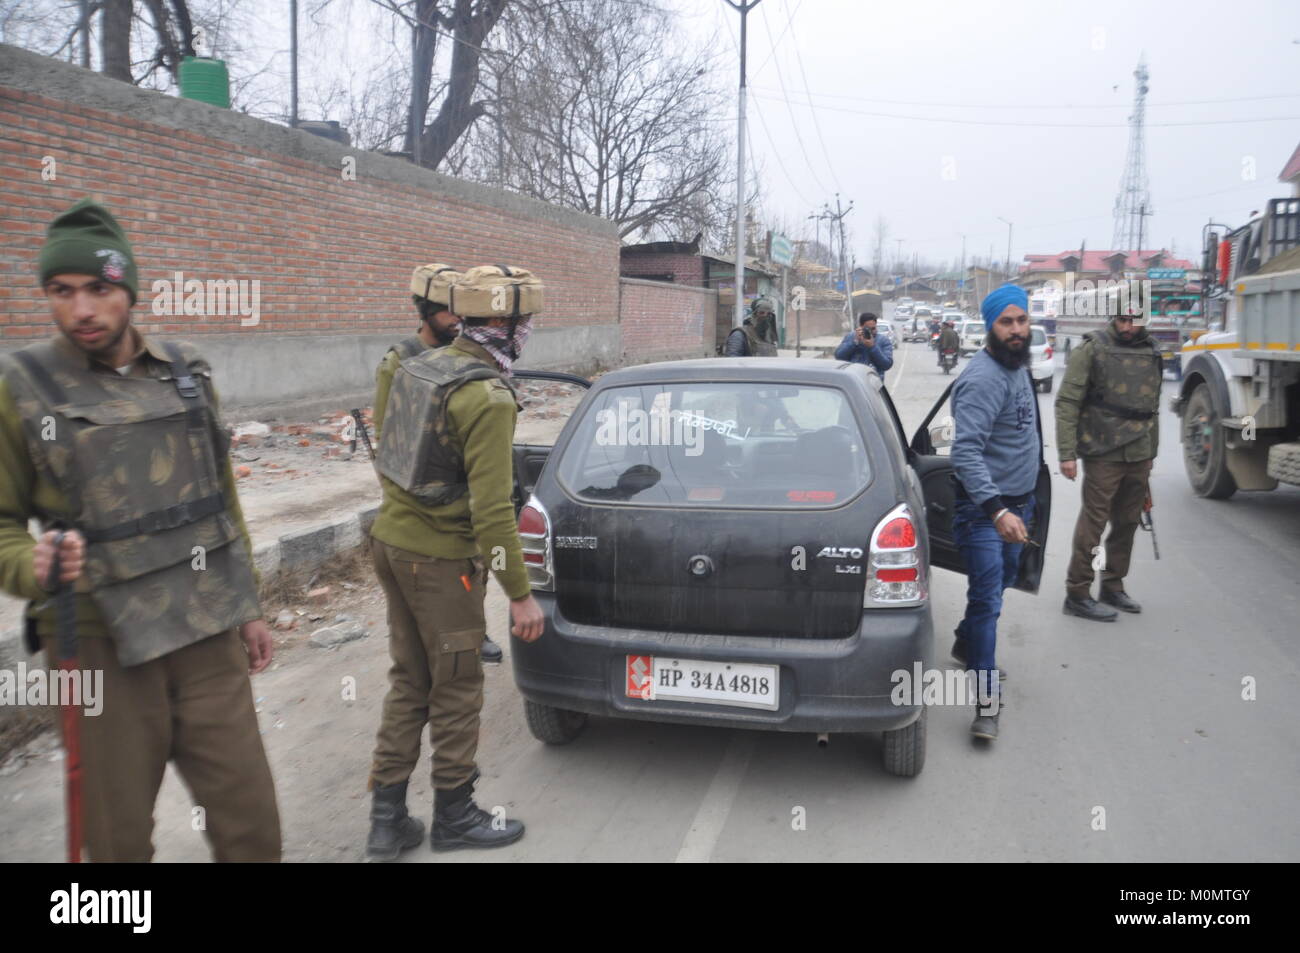 Policemen check a vehicle in Anantnag, Kashmir on January 23, 2018, ahead of Indian Republic Day on January 26 Stock Photo